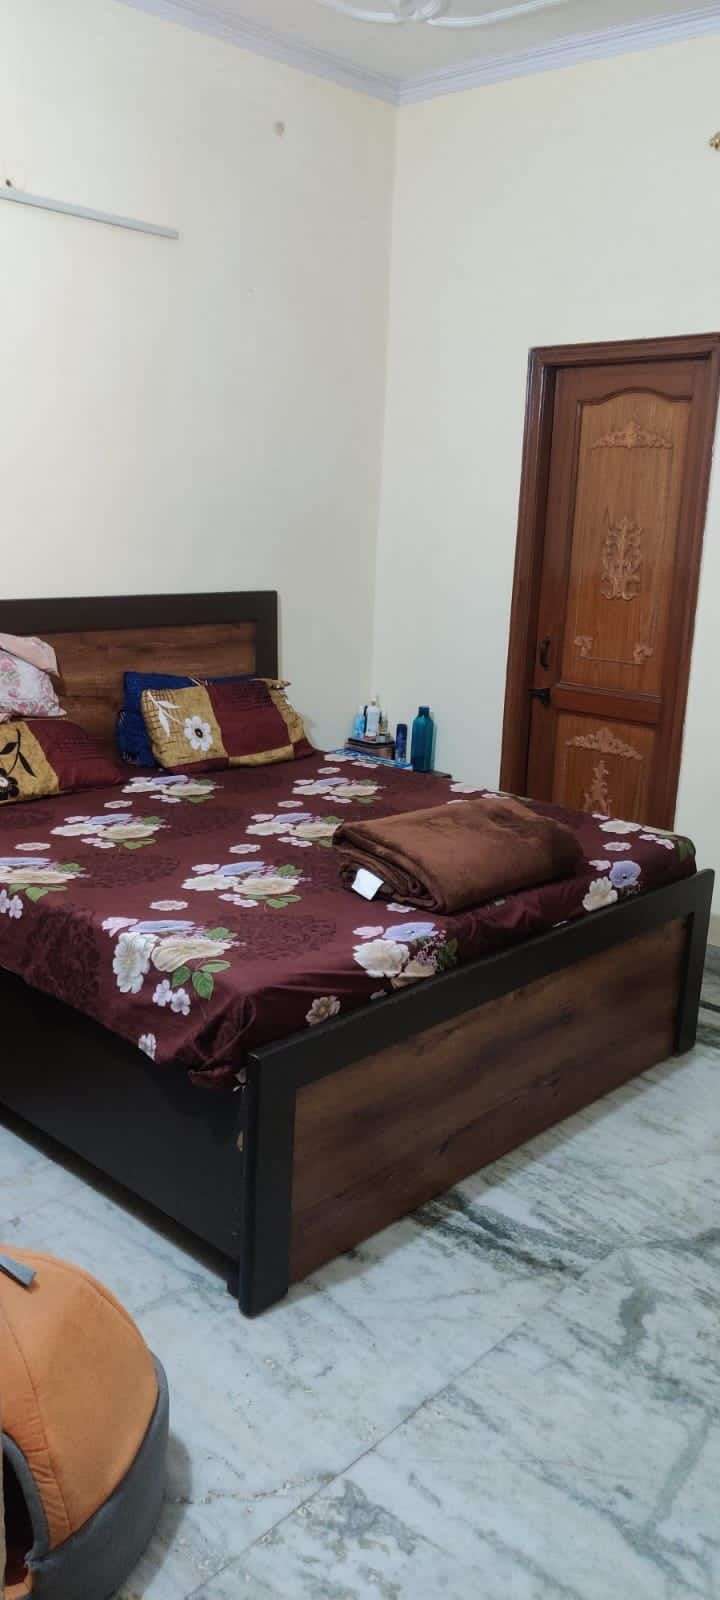 2 Bedroom 1440 Sq.Ft. Independent House in Sector 31 Faridabad